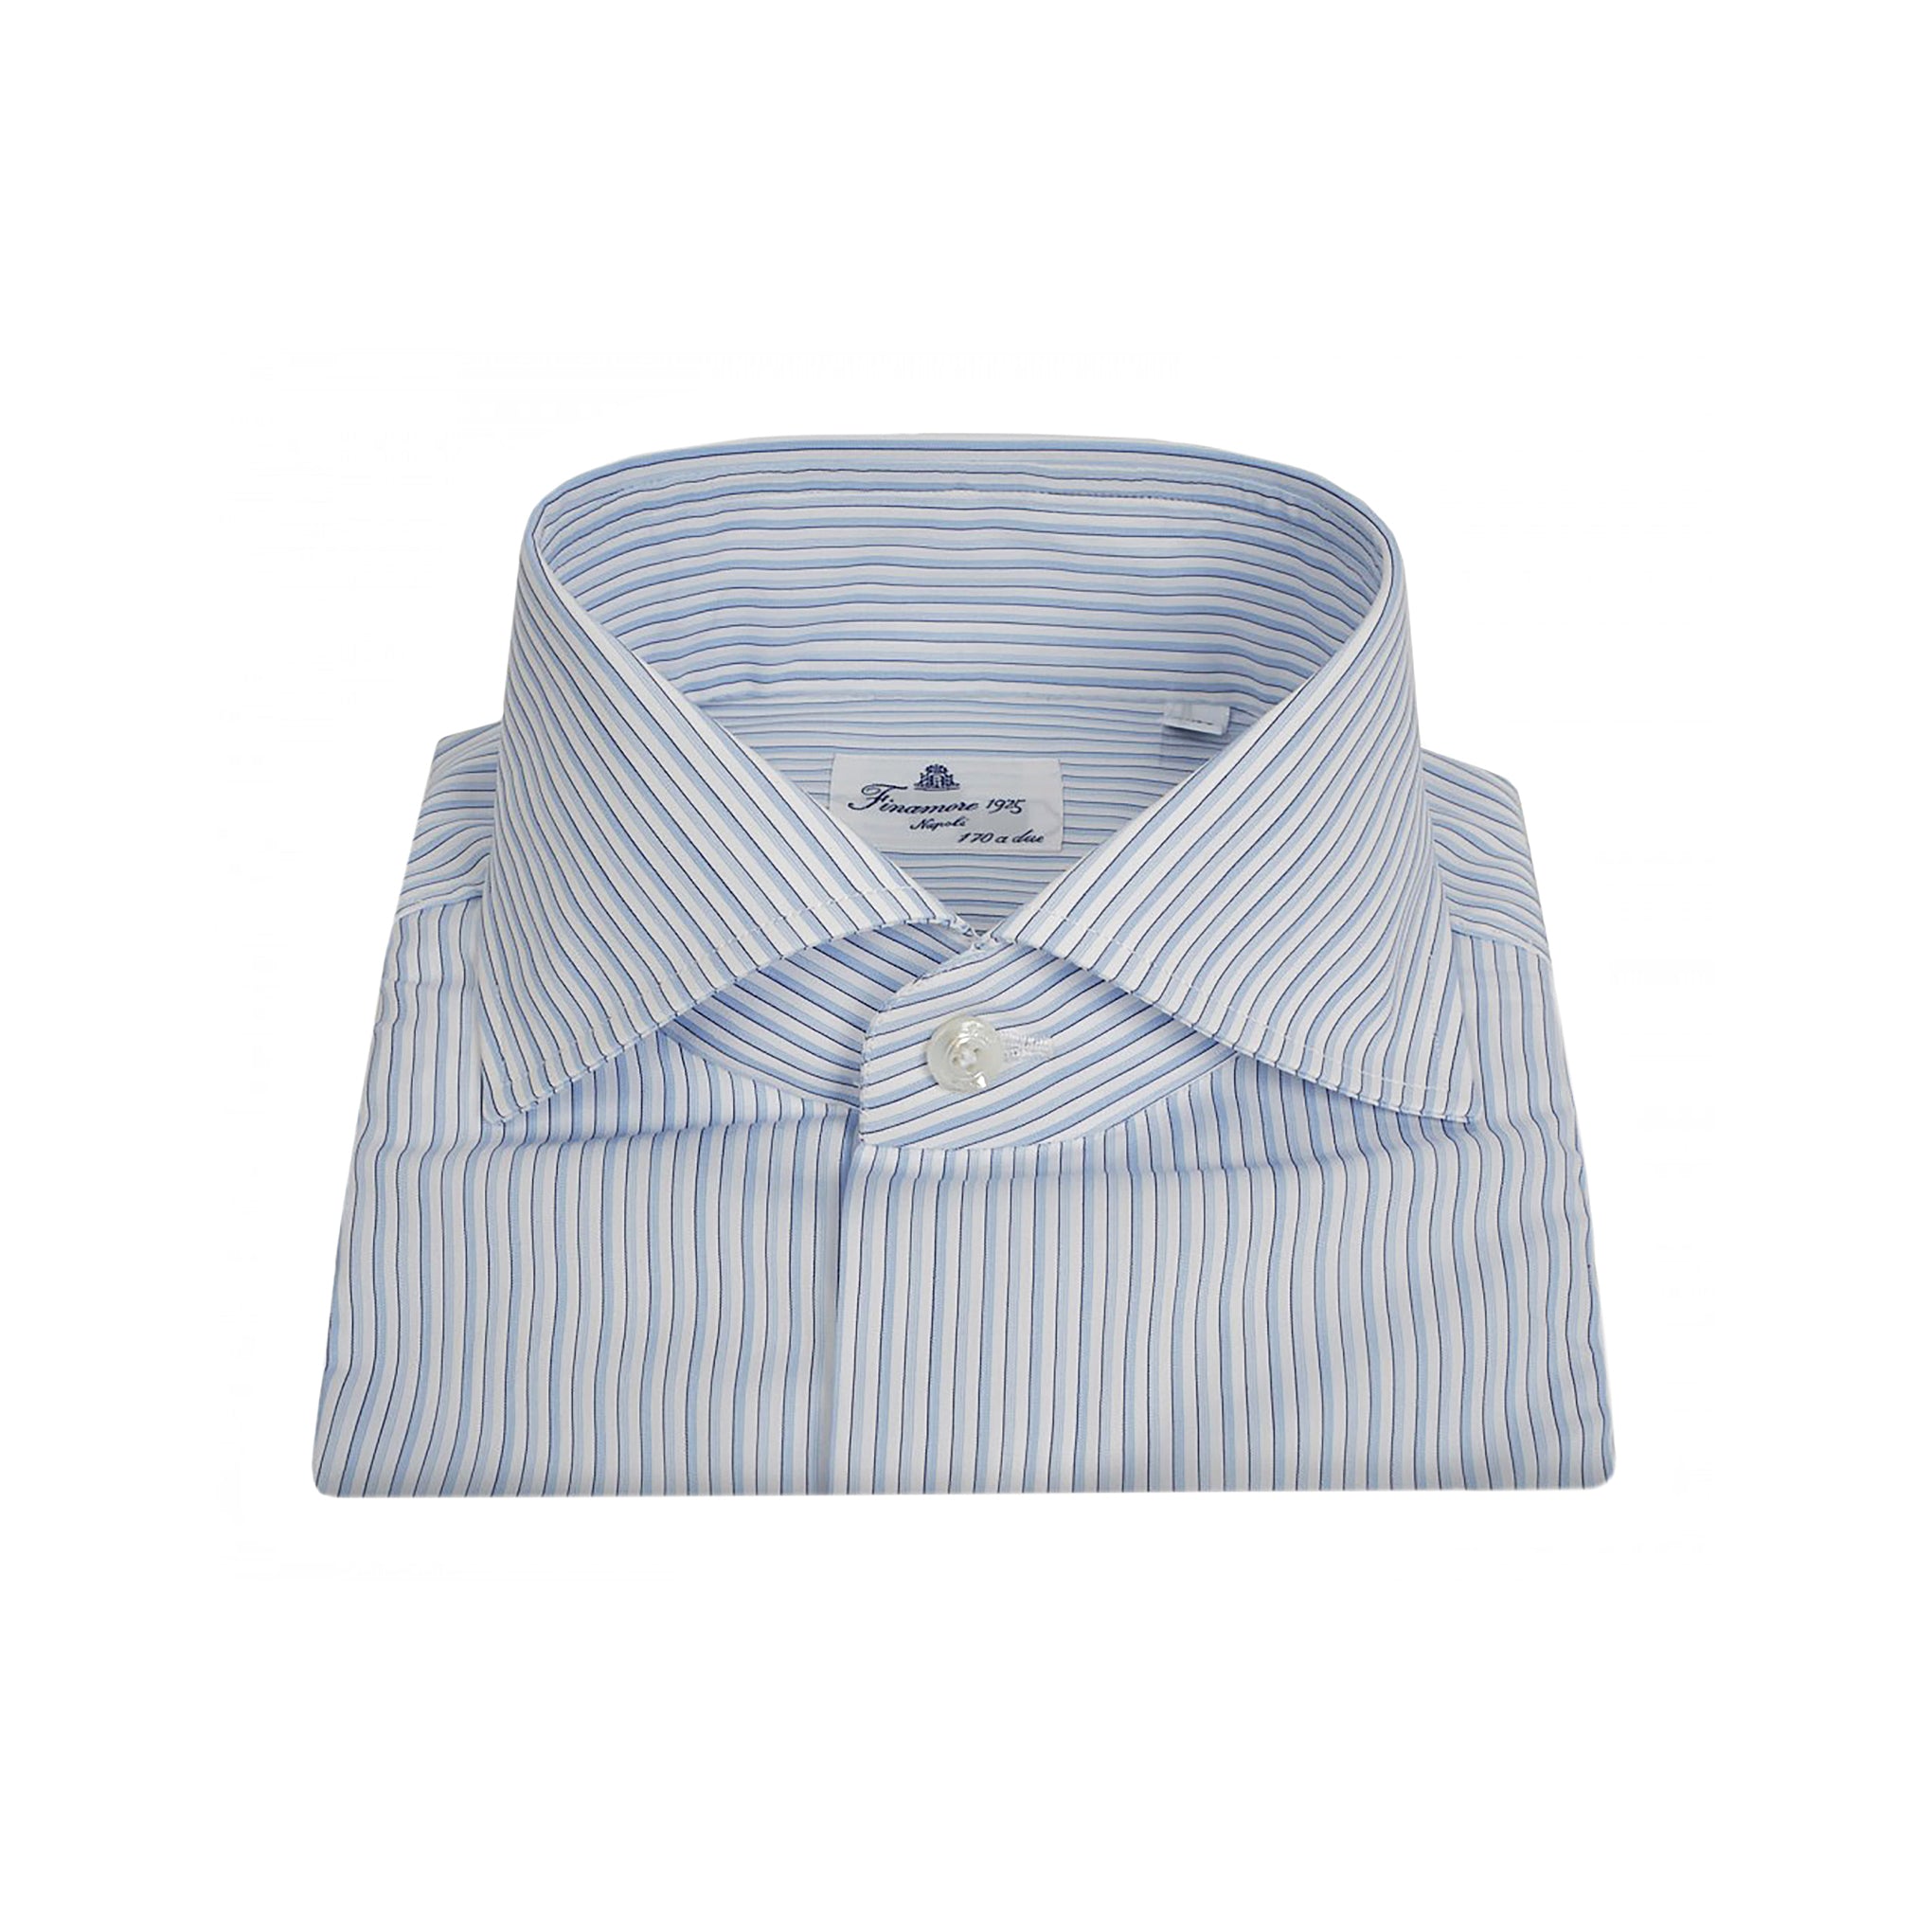 Shirt regular fit Napoli170 a due striped Egyptian cotton